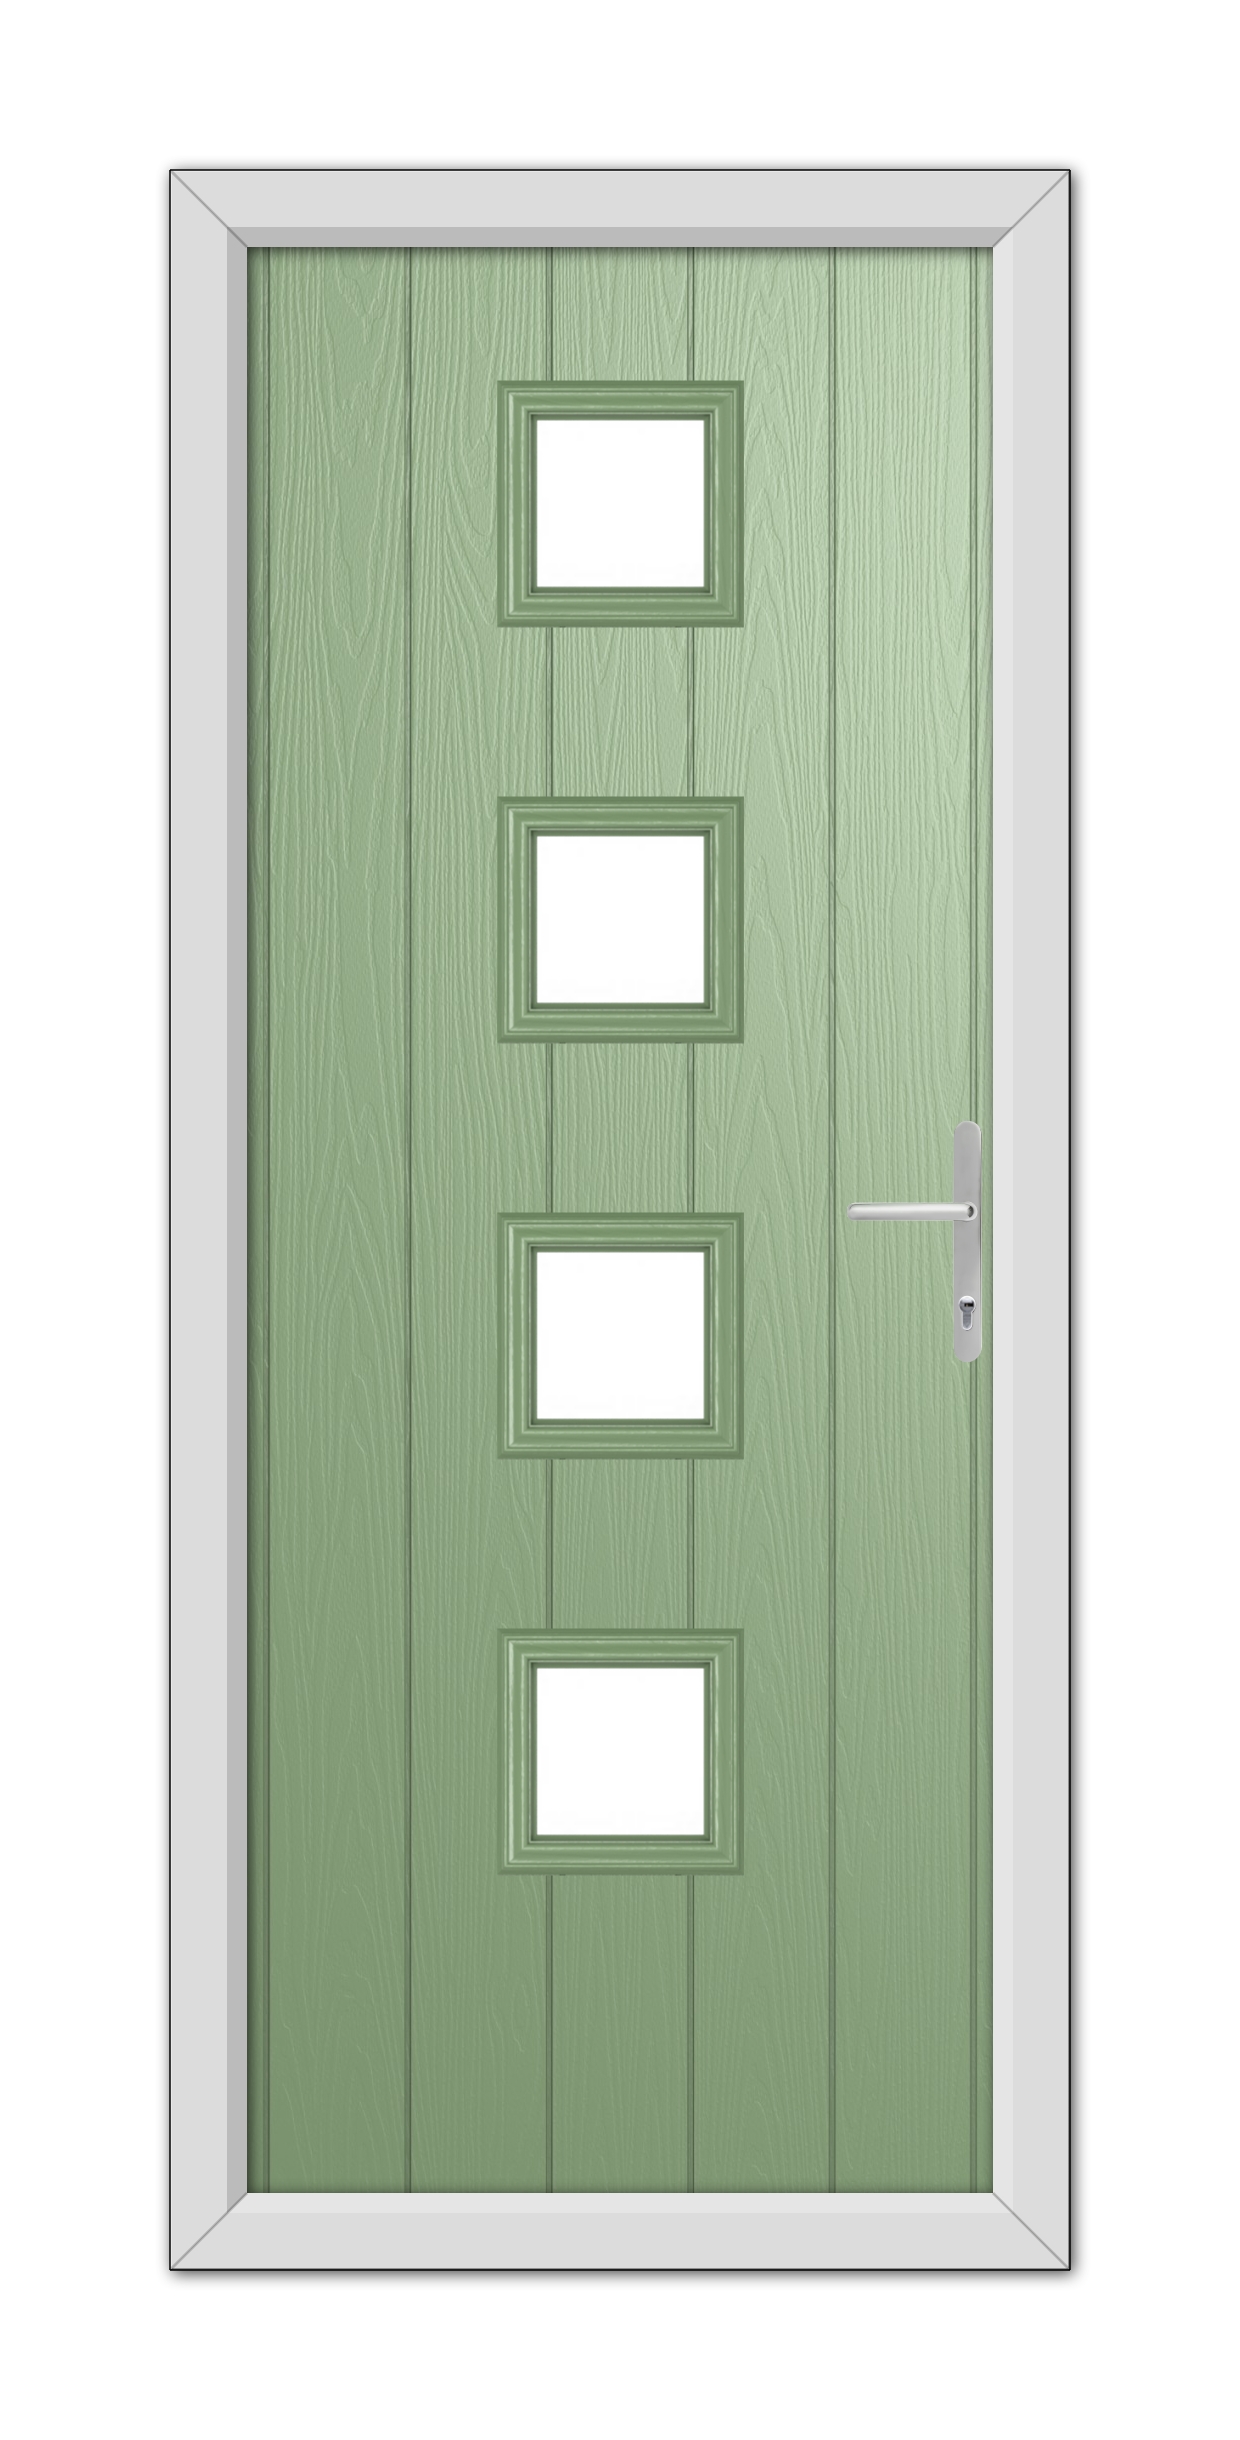 A modern Chartwell Green Hamilton Composite Door with four rectangular windows and a metallic handle, set within a gray frame.